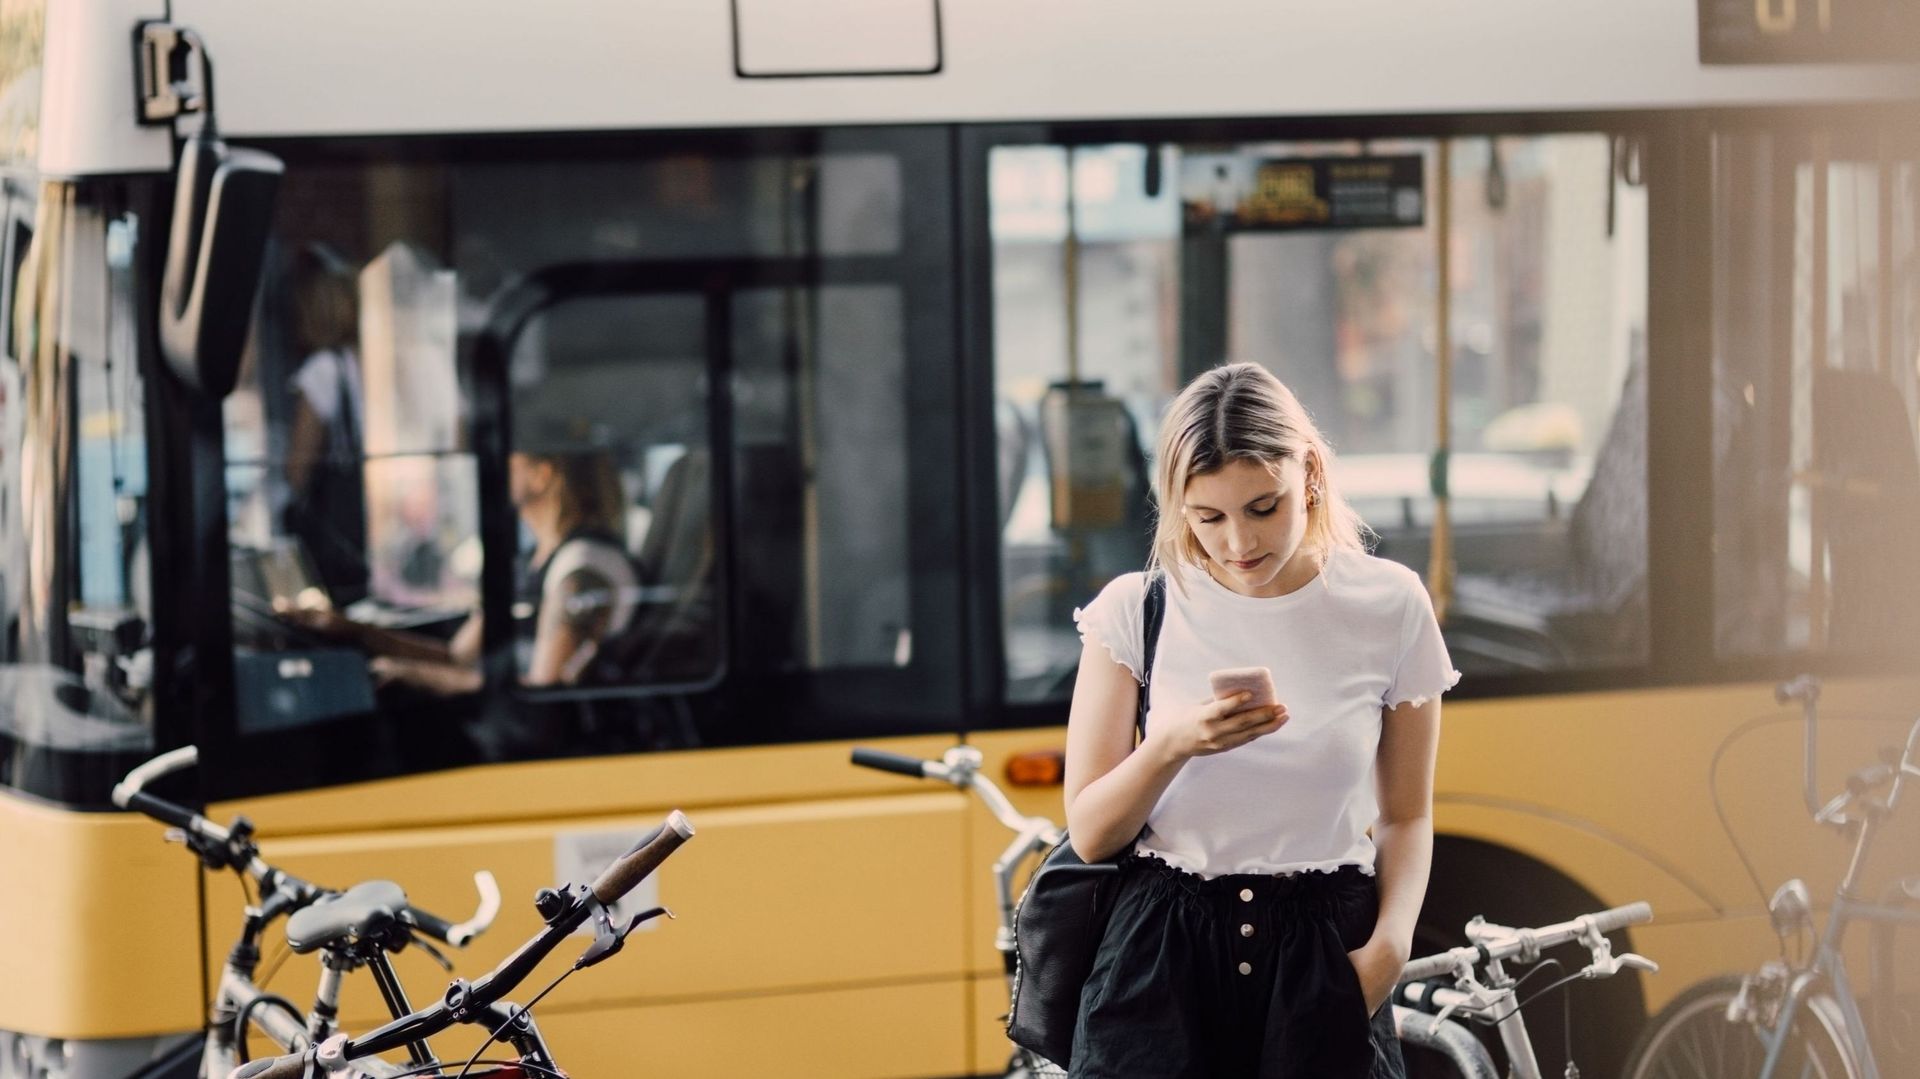 Young woman using smart phone while standing by bicycles against bus in city